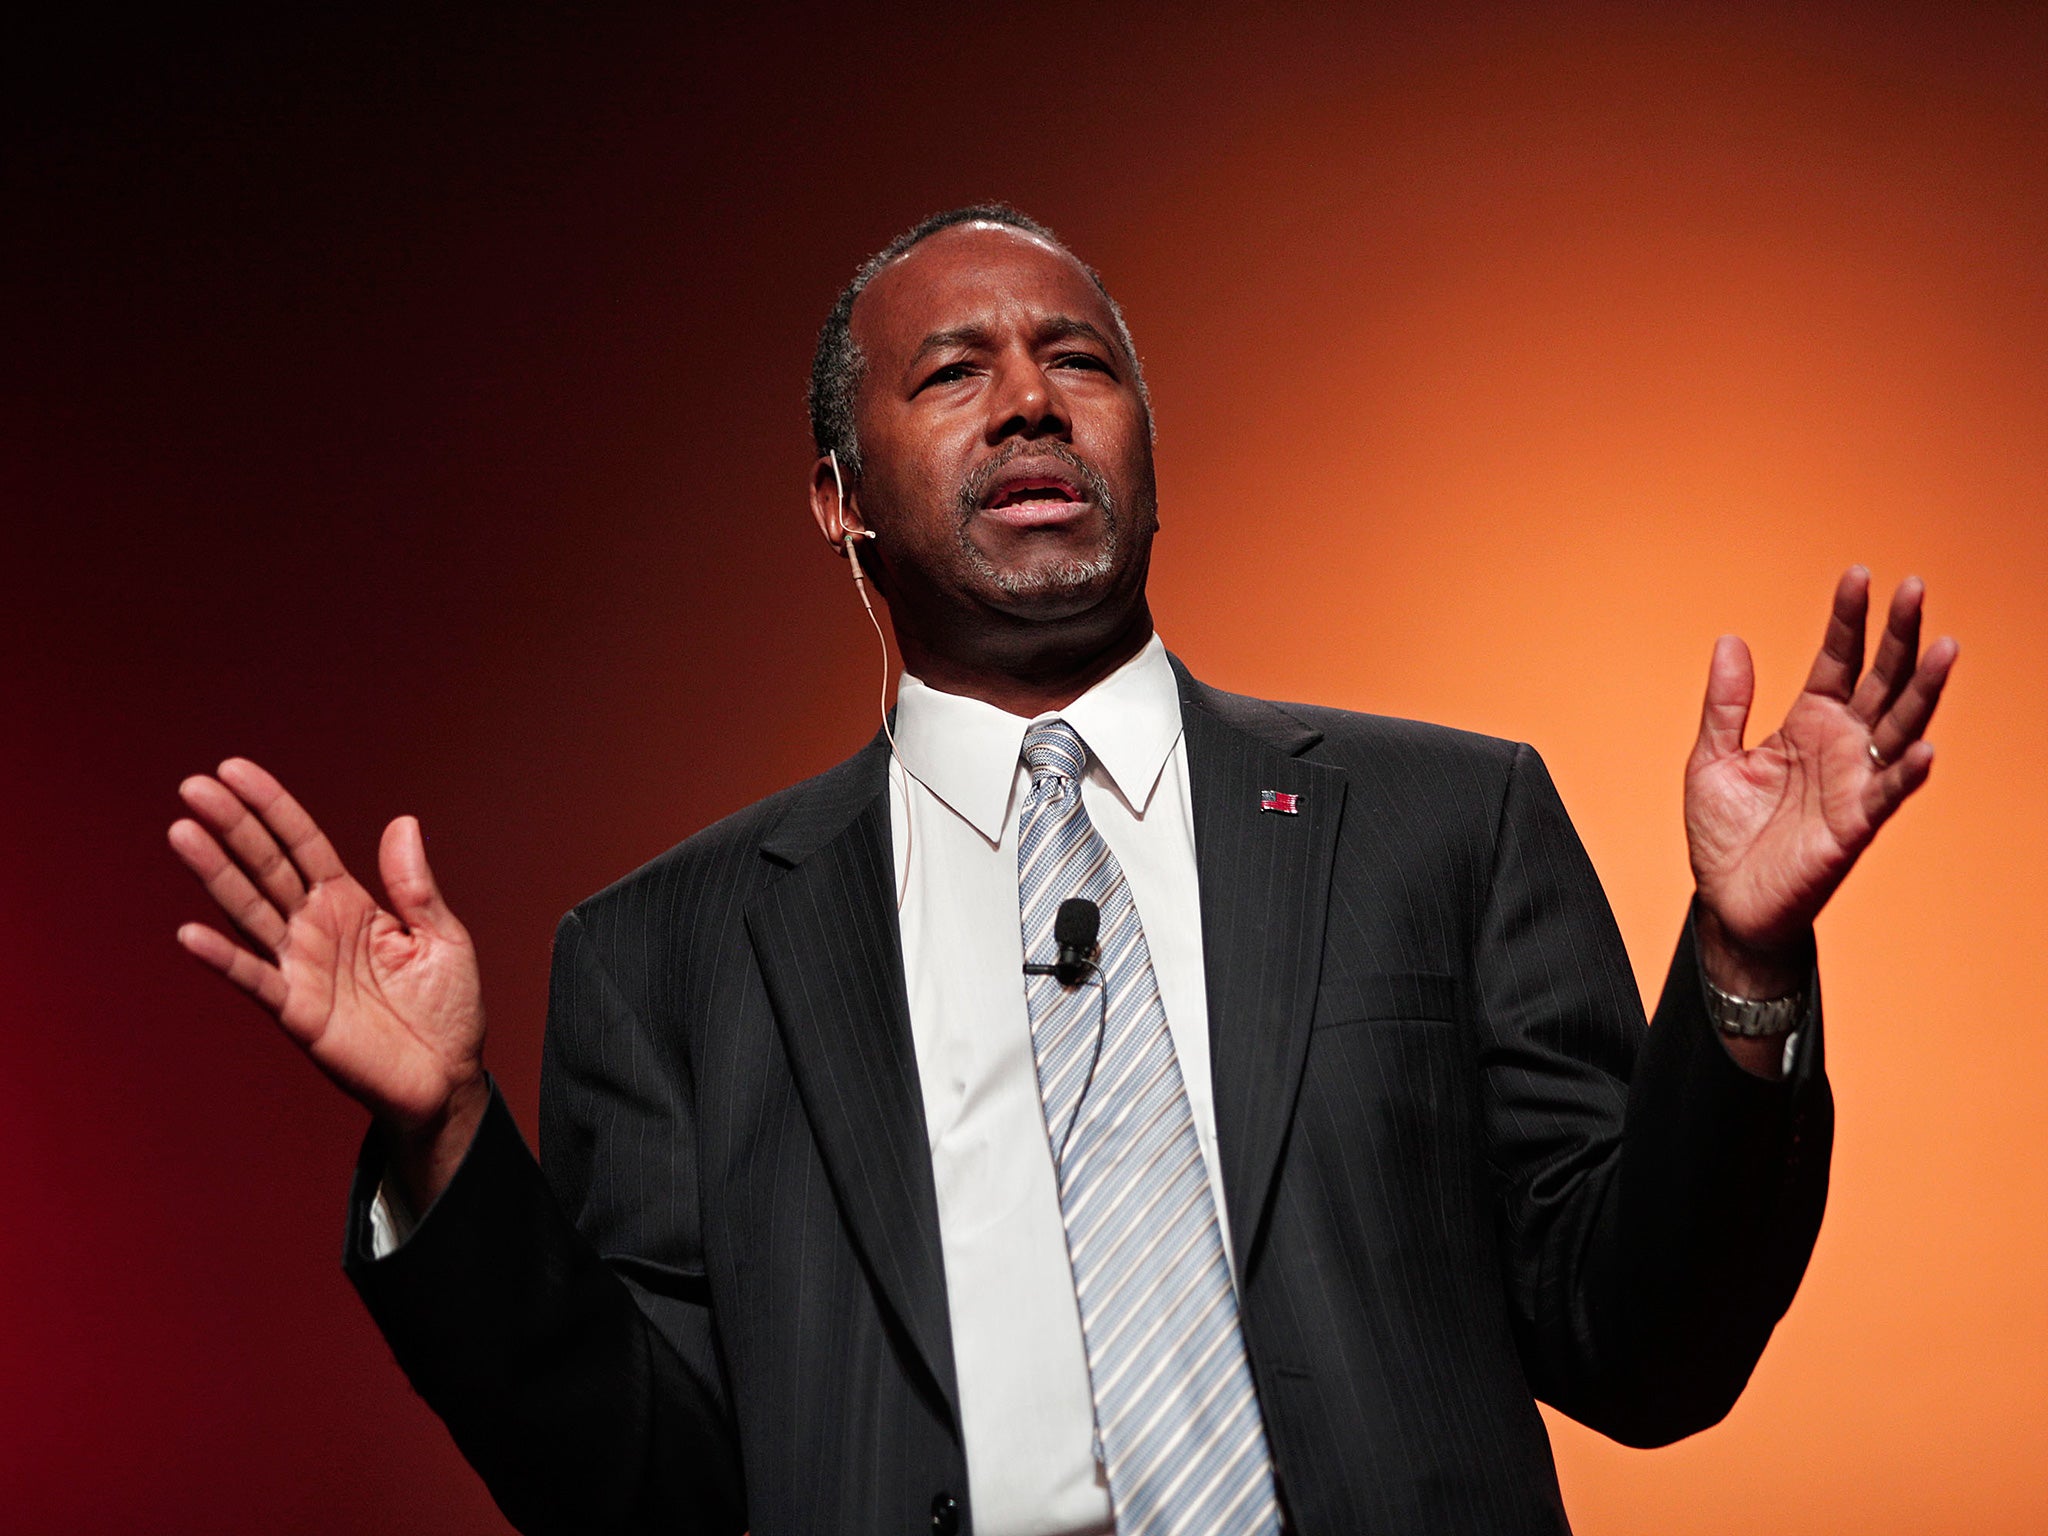 Ben Carson will go head to head with his rival candidates in the Republican debate